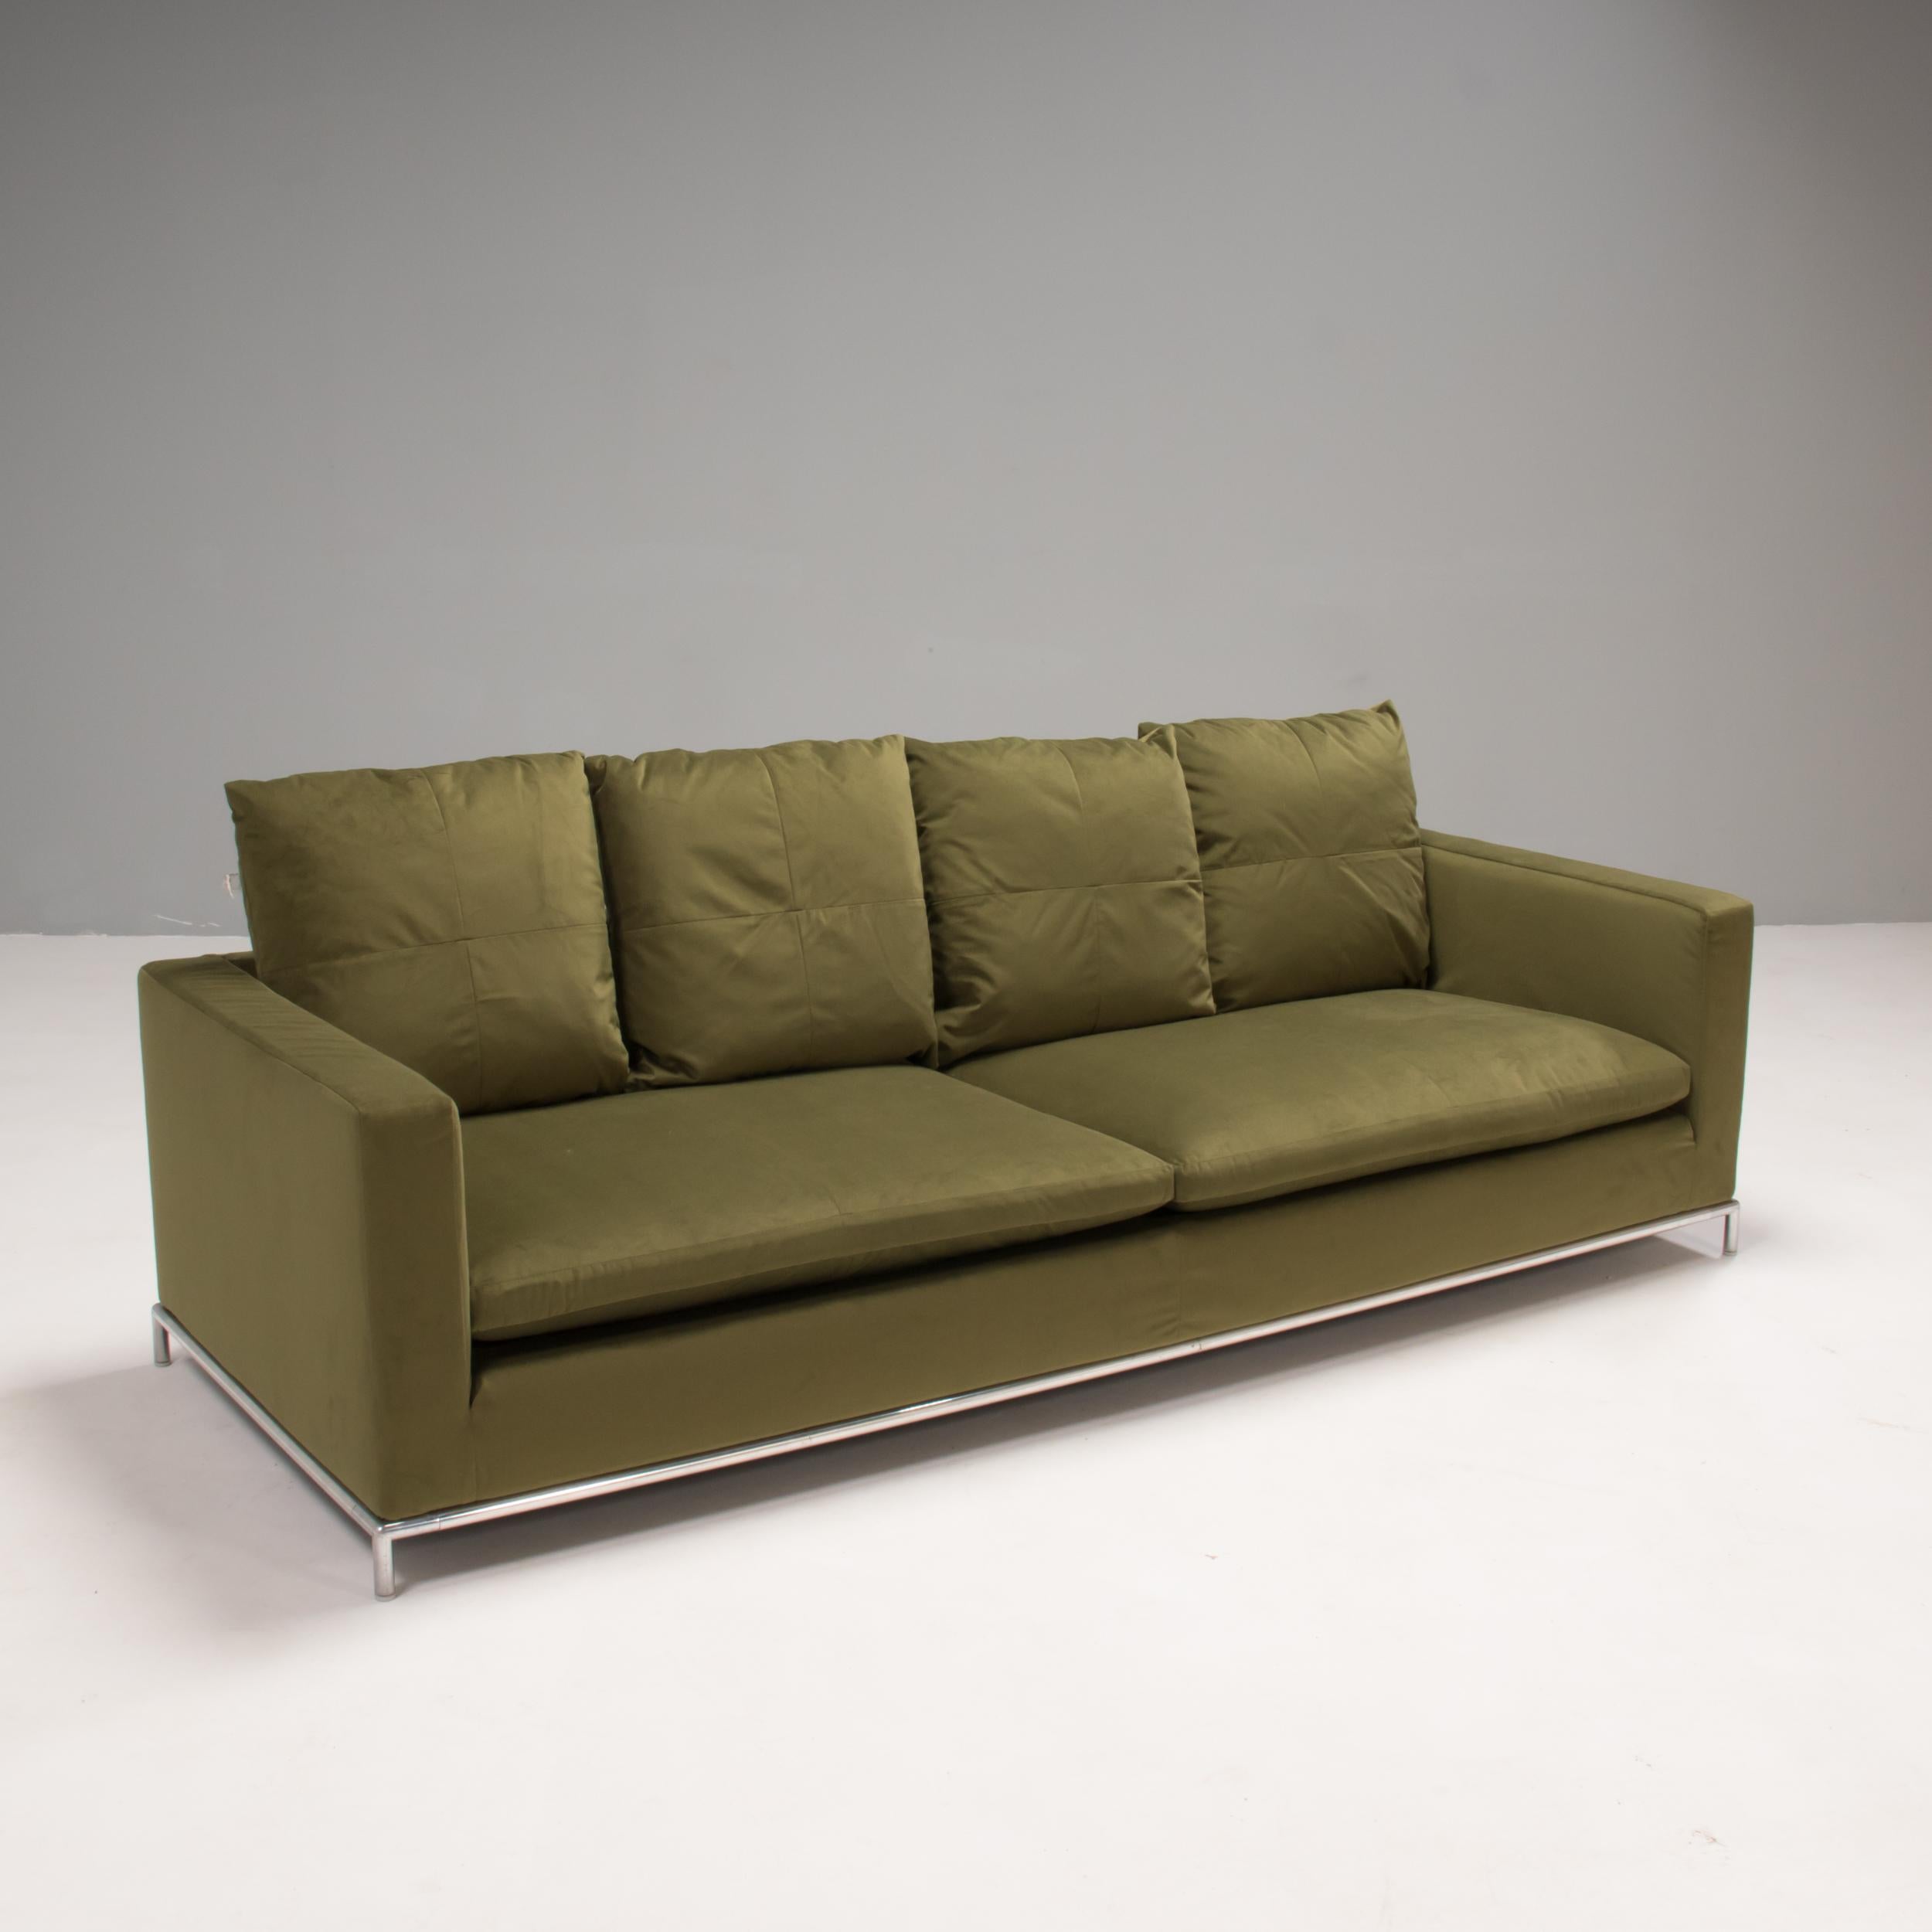 Originally designed in 2001 by Antonio Citterio for B&B Italia, this George four-seat sofa offers both comfort and style. 

The sofa features a slim tubular steel frame with protective glides and is fully upholstered in a beautiful olive green